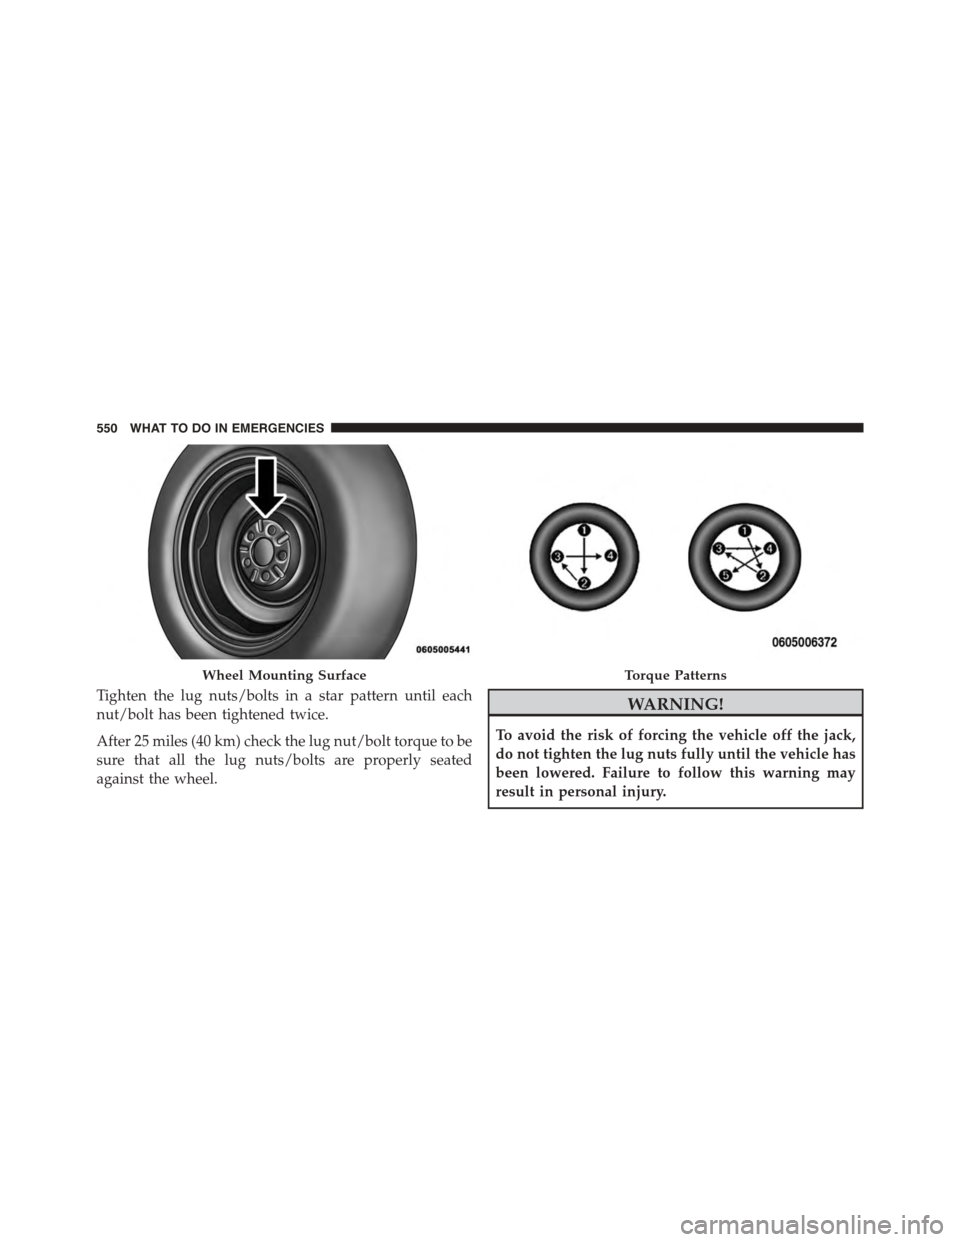 DODGE DURANGO 2015 3.G Owners Manual Tighten the lug nuts/bolts in a star pattern until each
nut/bolt has been tightened twice.
After 25 miles (40 km) check the lug nut/bolt torque to be
sure that all the lug nuts/bolts are properly seat